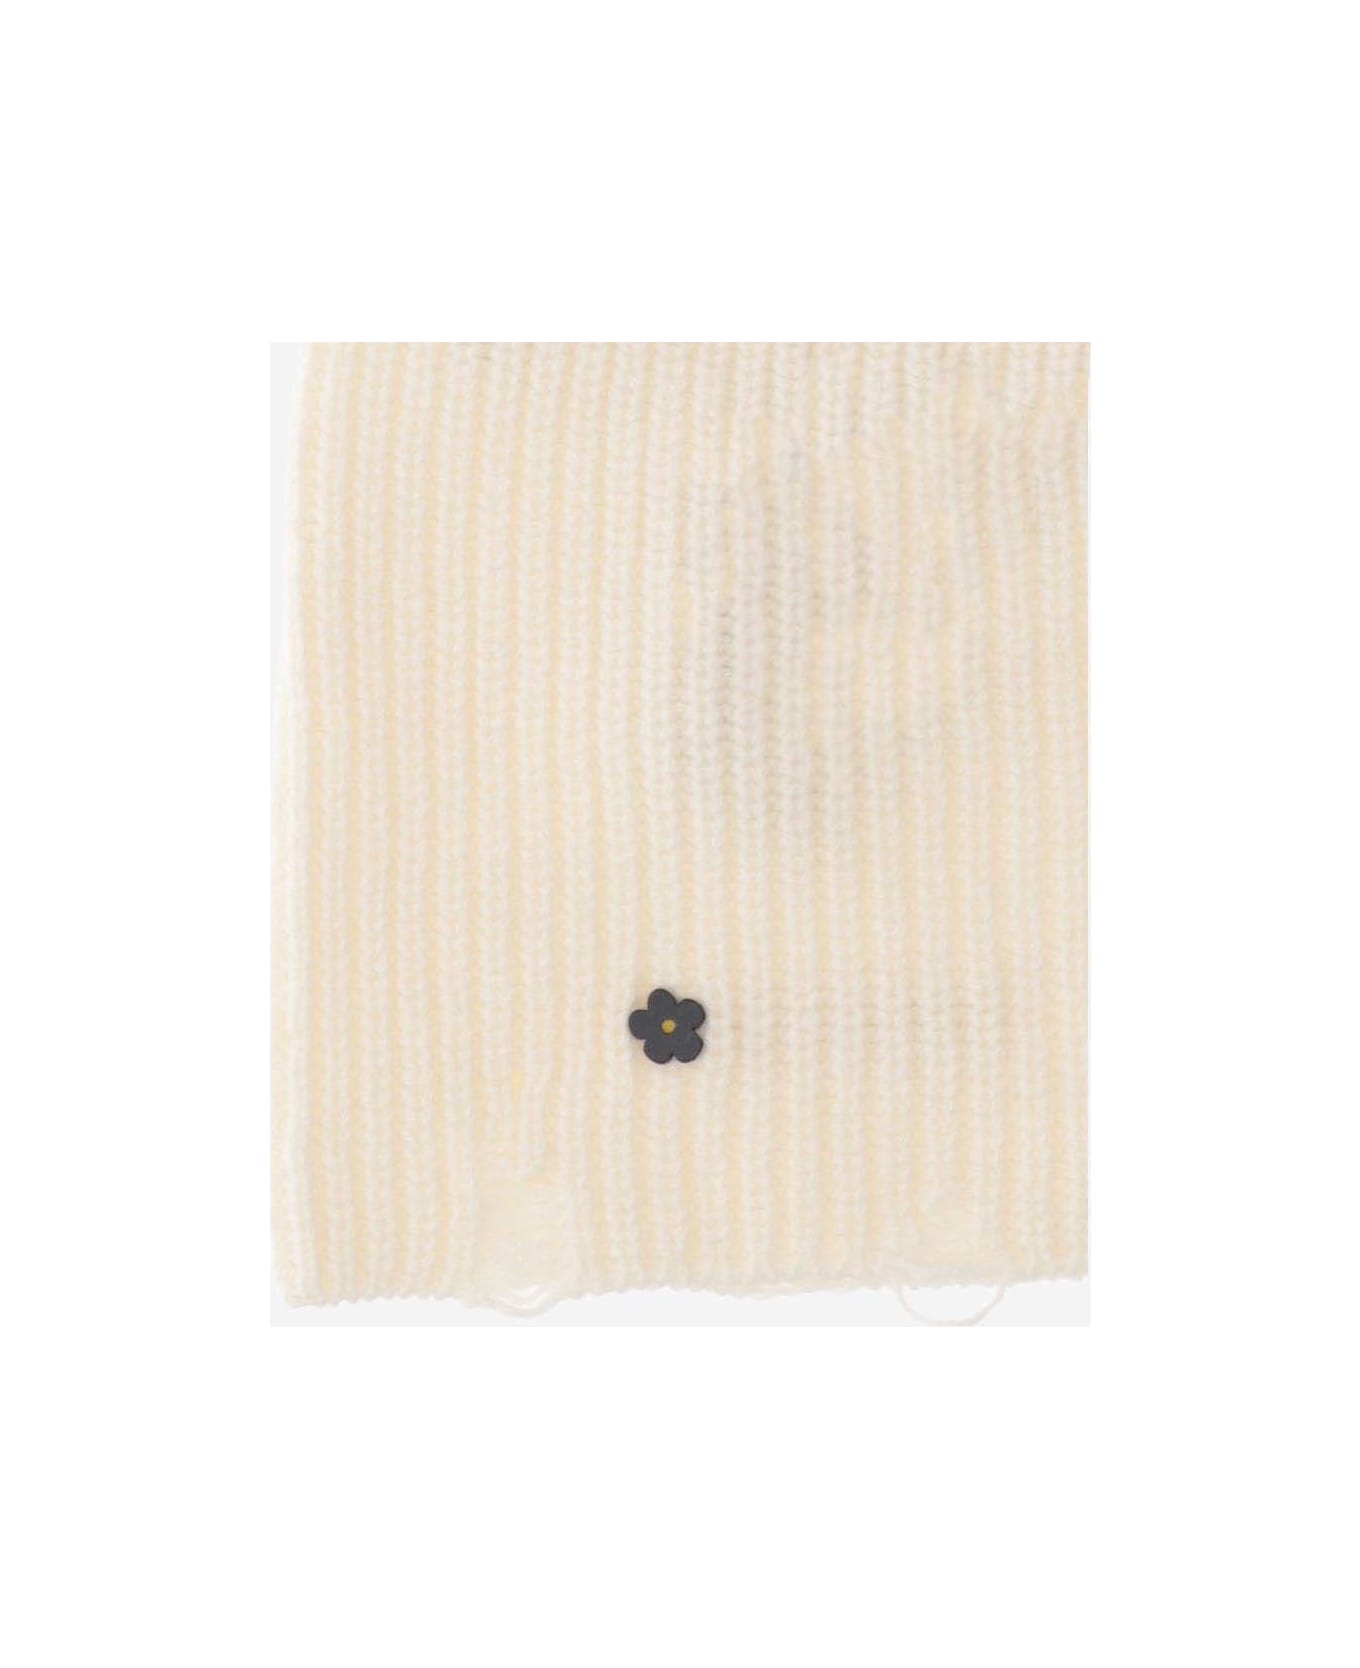 A Paper Kid Wool And Cashmere Beanie - Beige